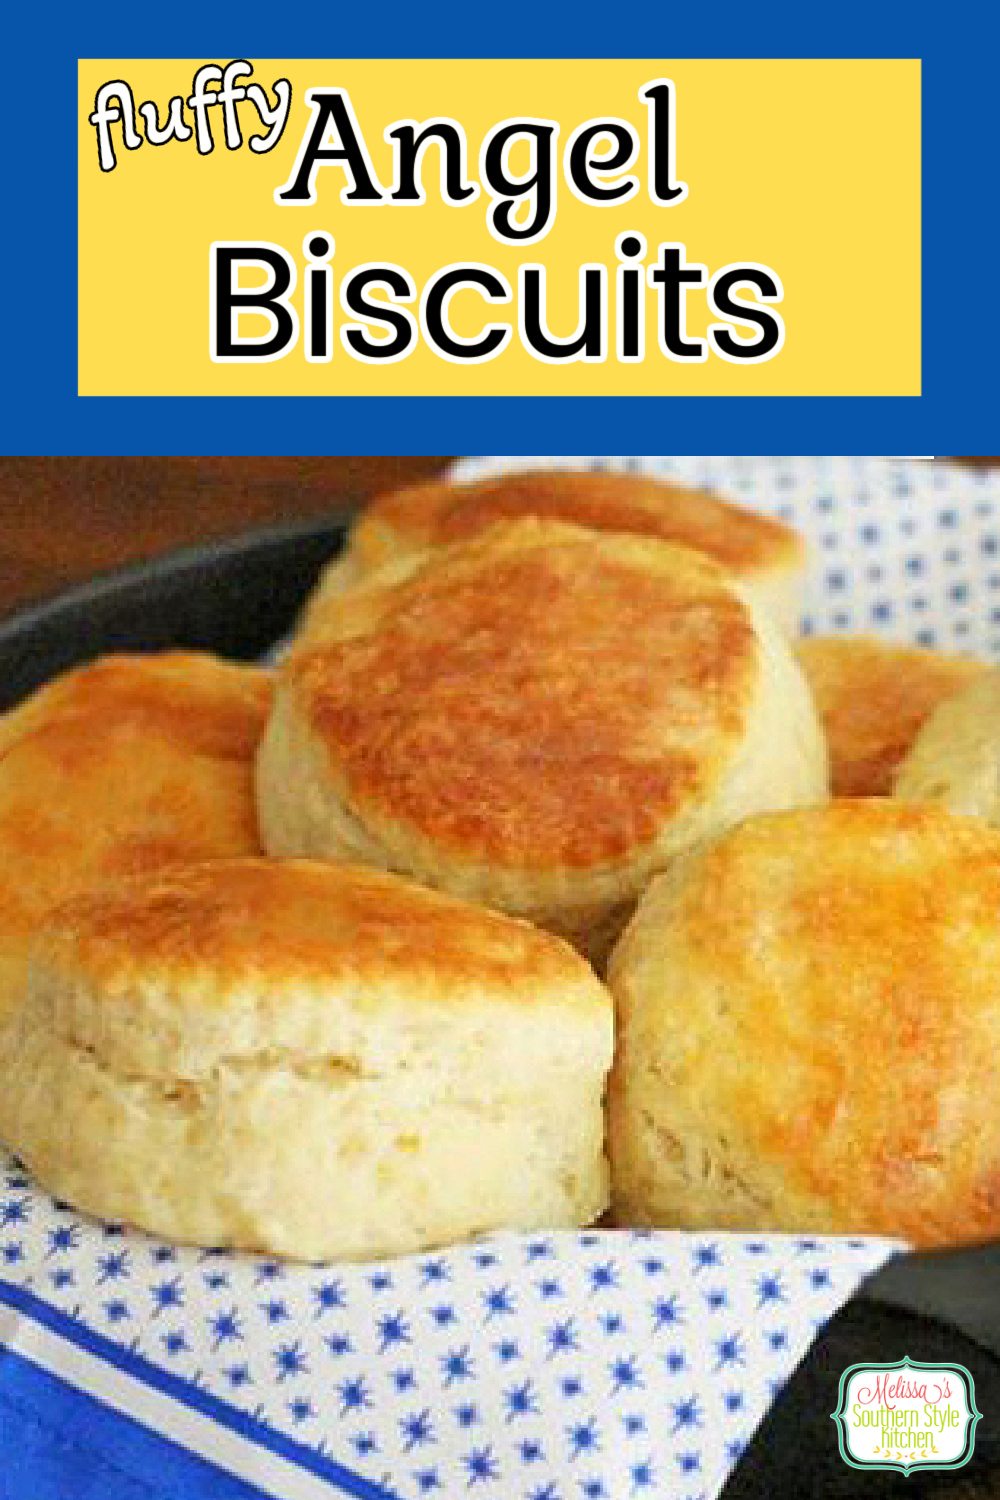 These irresistible Angel Biscuits are a cross between a buttermilk biscuit and yeast-like dinner roll #angelbiscuits #biscuitrecipes #rolls #breadrecipes #southernbiscuits #buttermilkbiscuits #holidaybrunch #brunchrecipes #breakfast #food #recipes #Southernfood #Southernrecipes